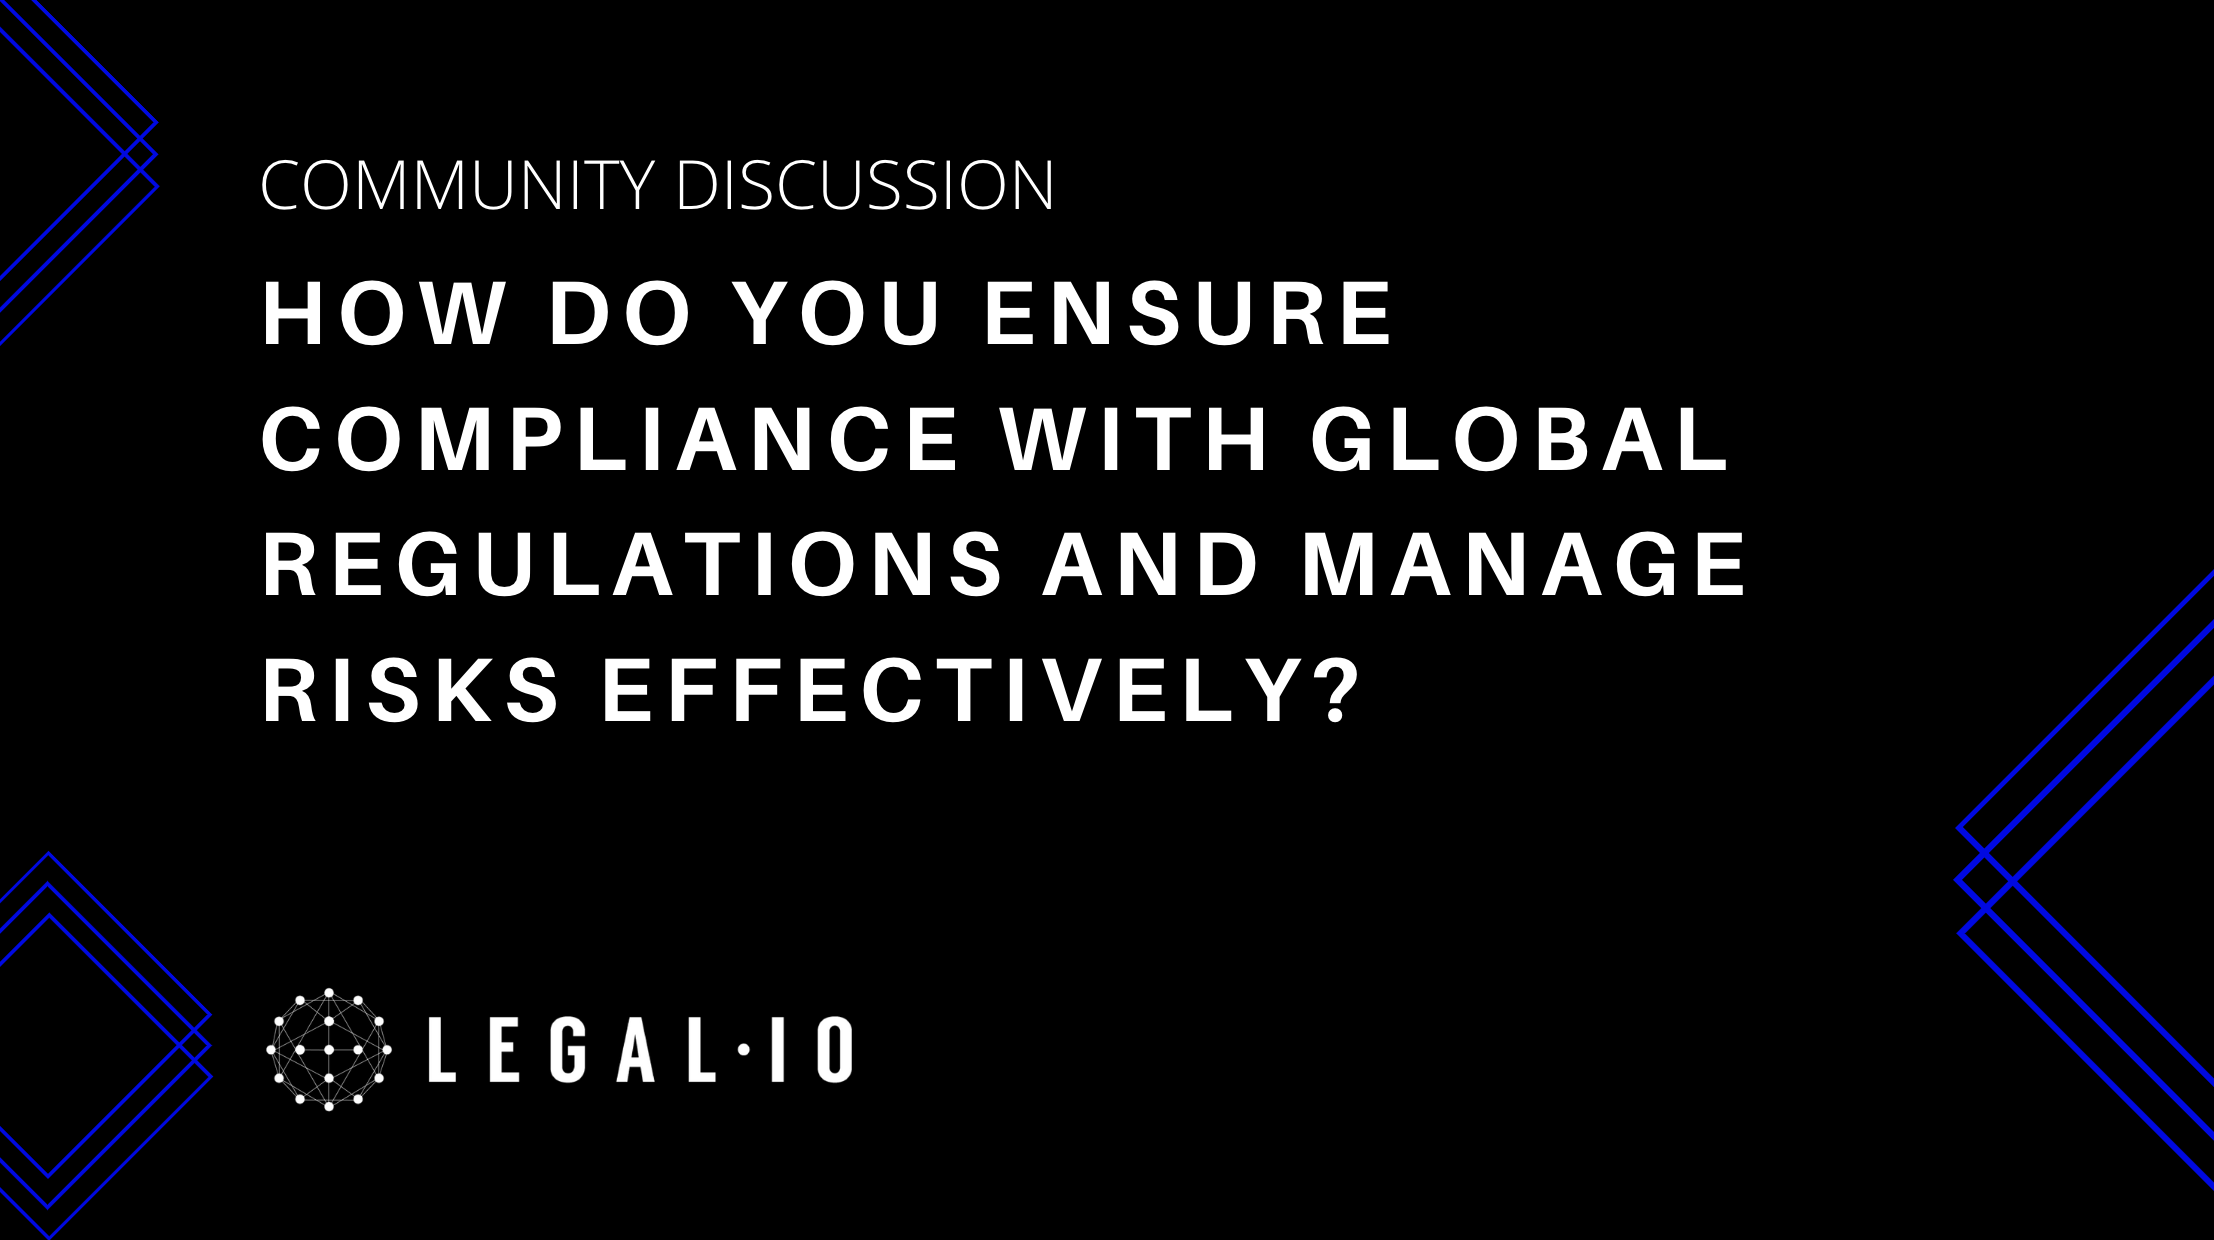 Community Discussion: How do you ensure compliance with global regulations and manage risks effectively?